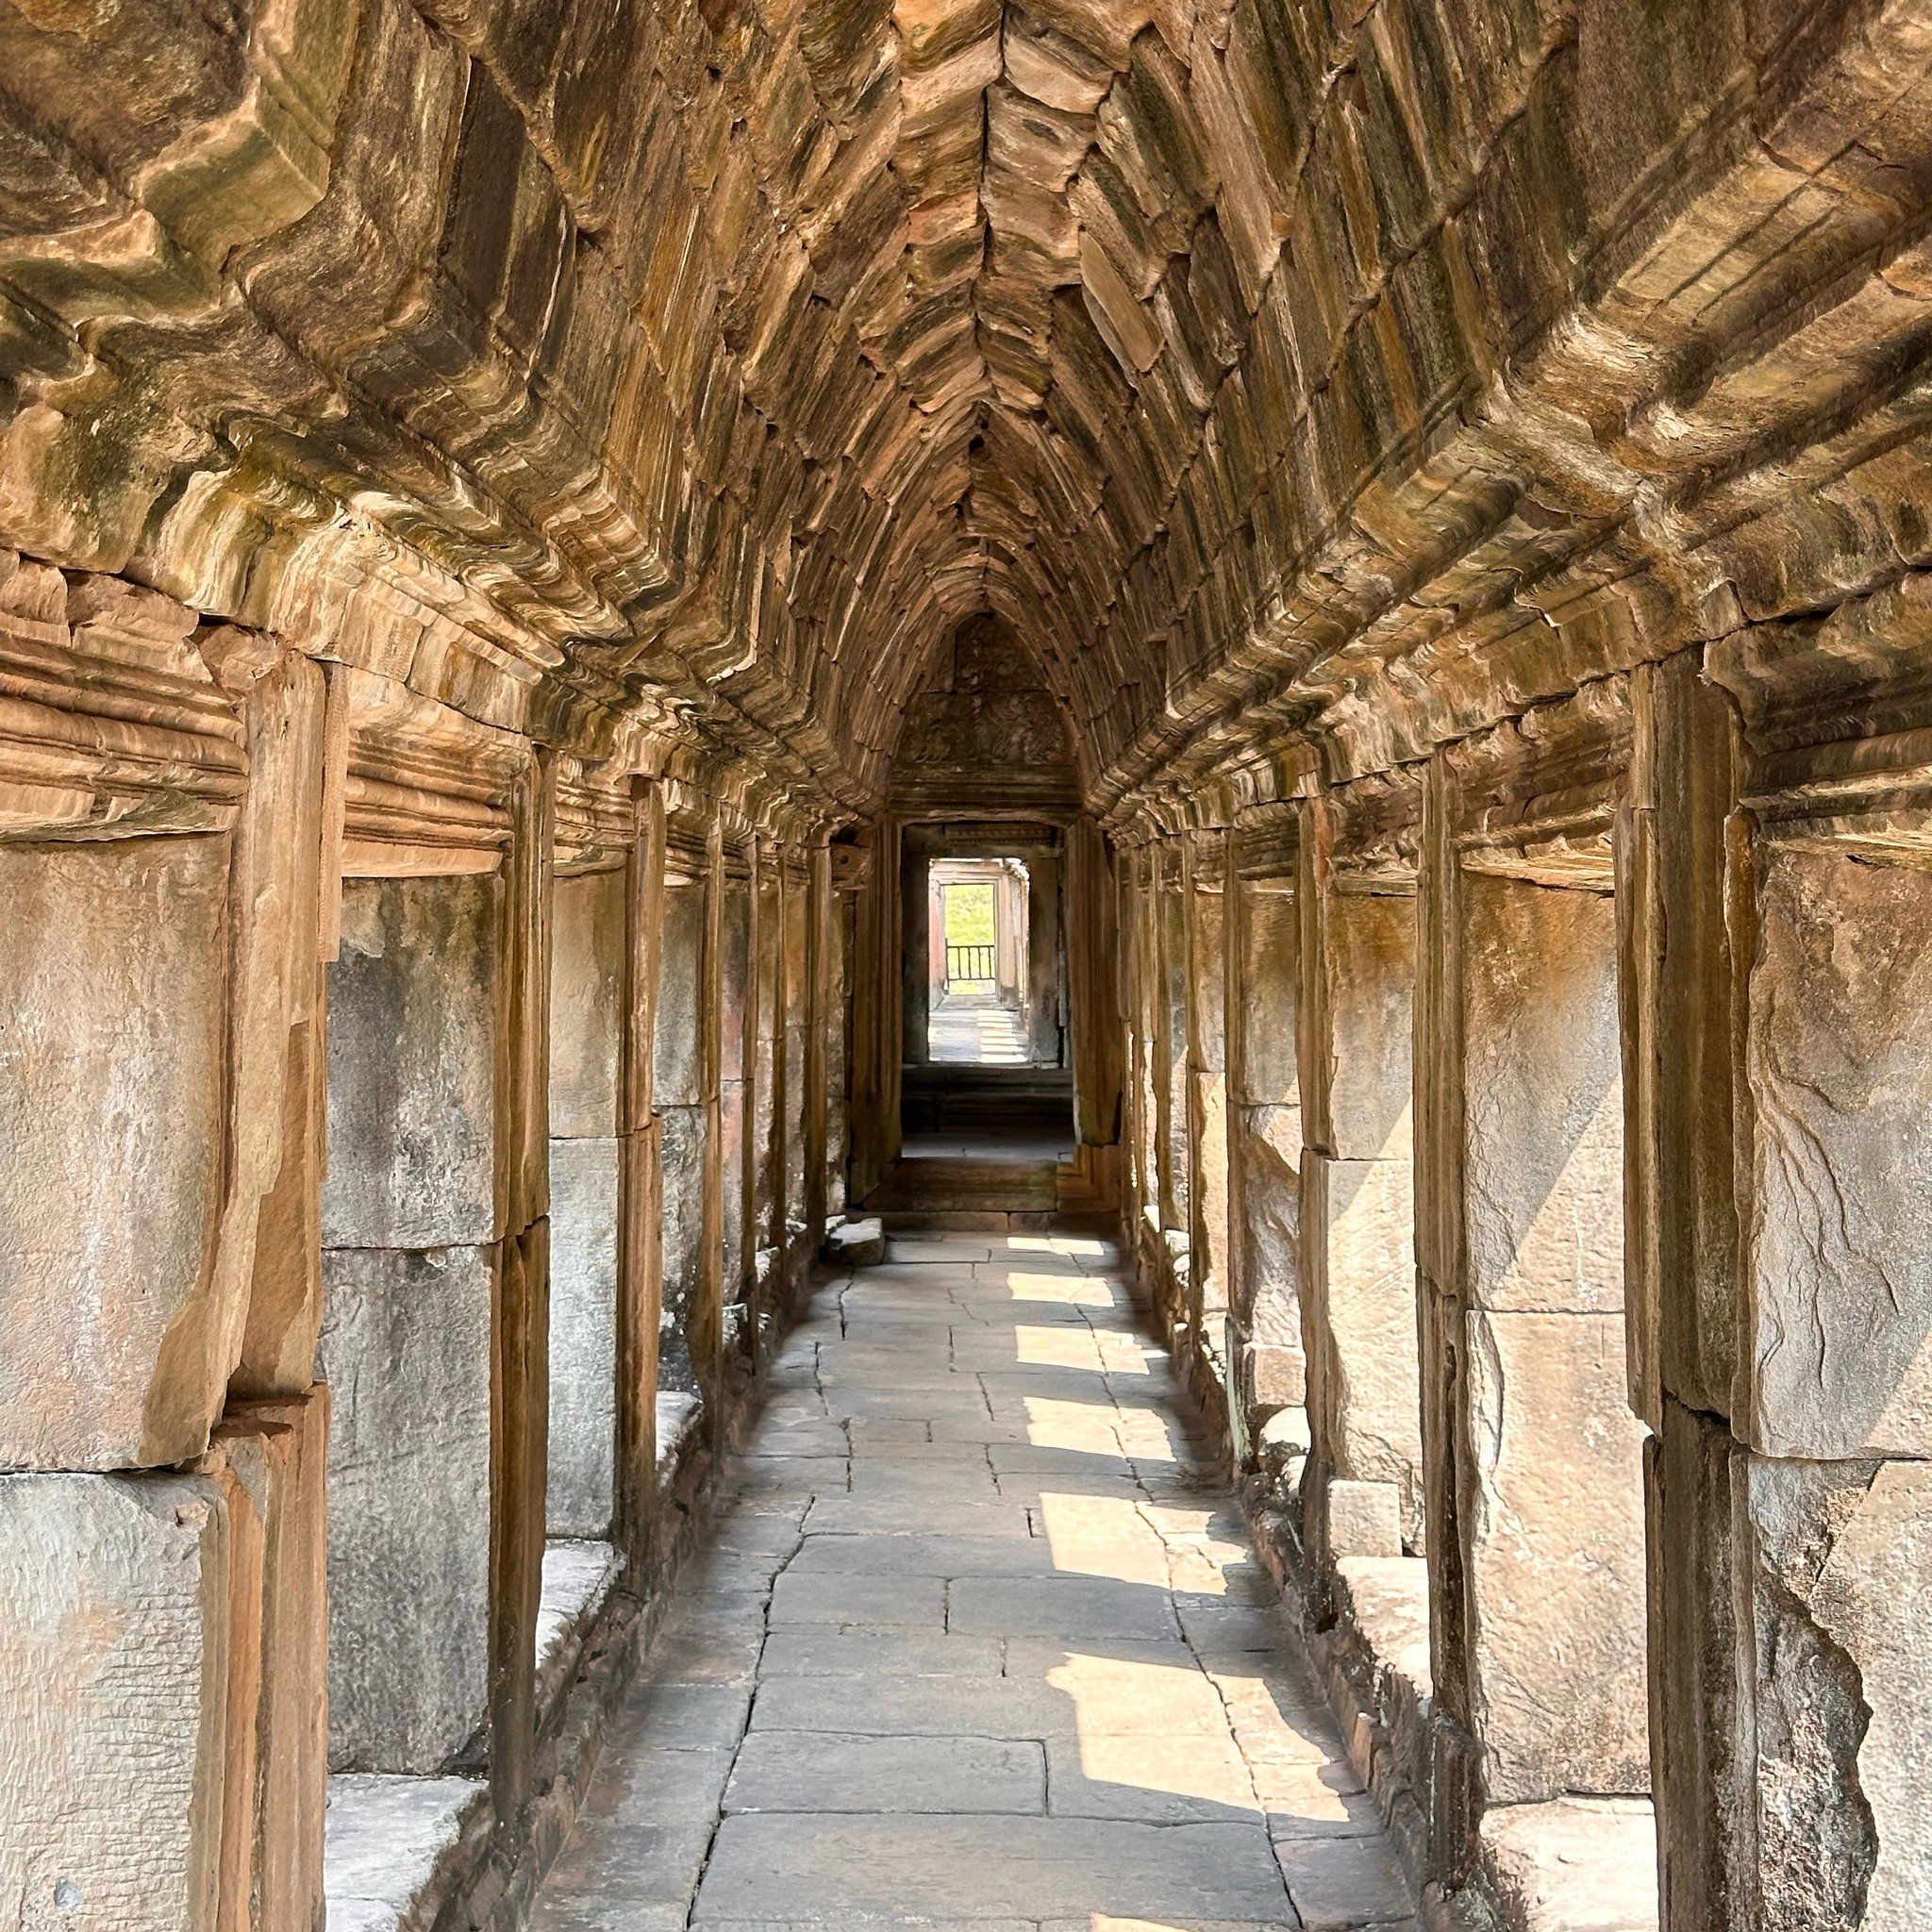 Many temple to see in #angkorwat #siemreap